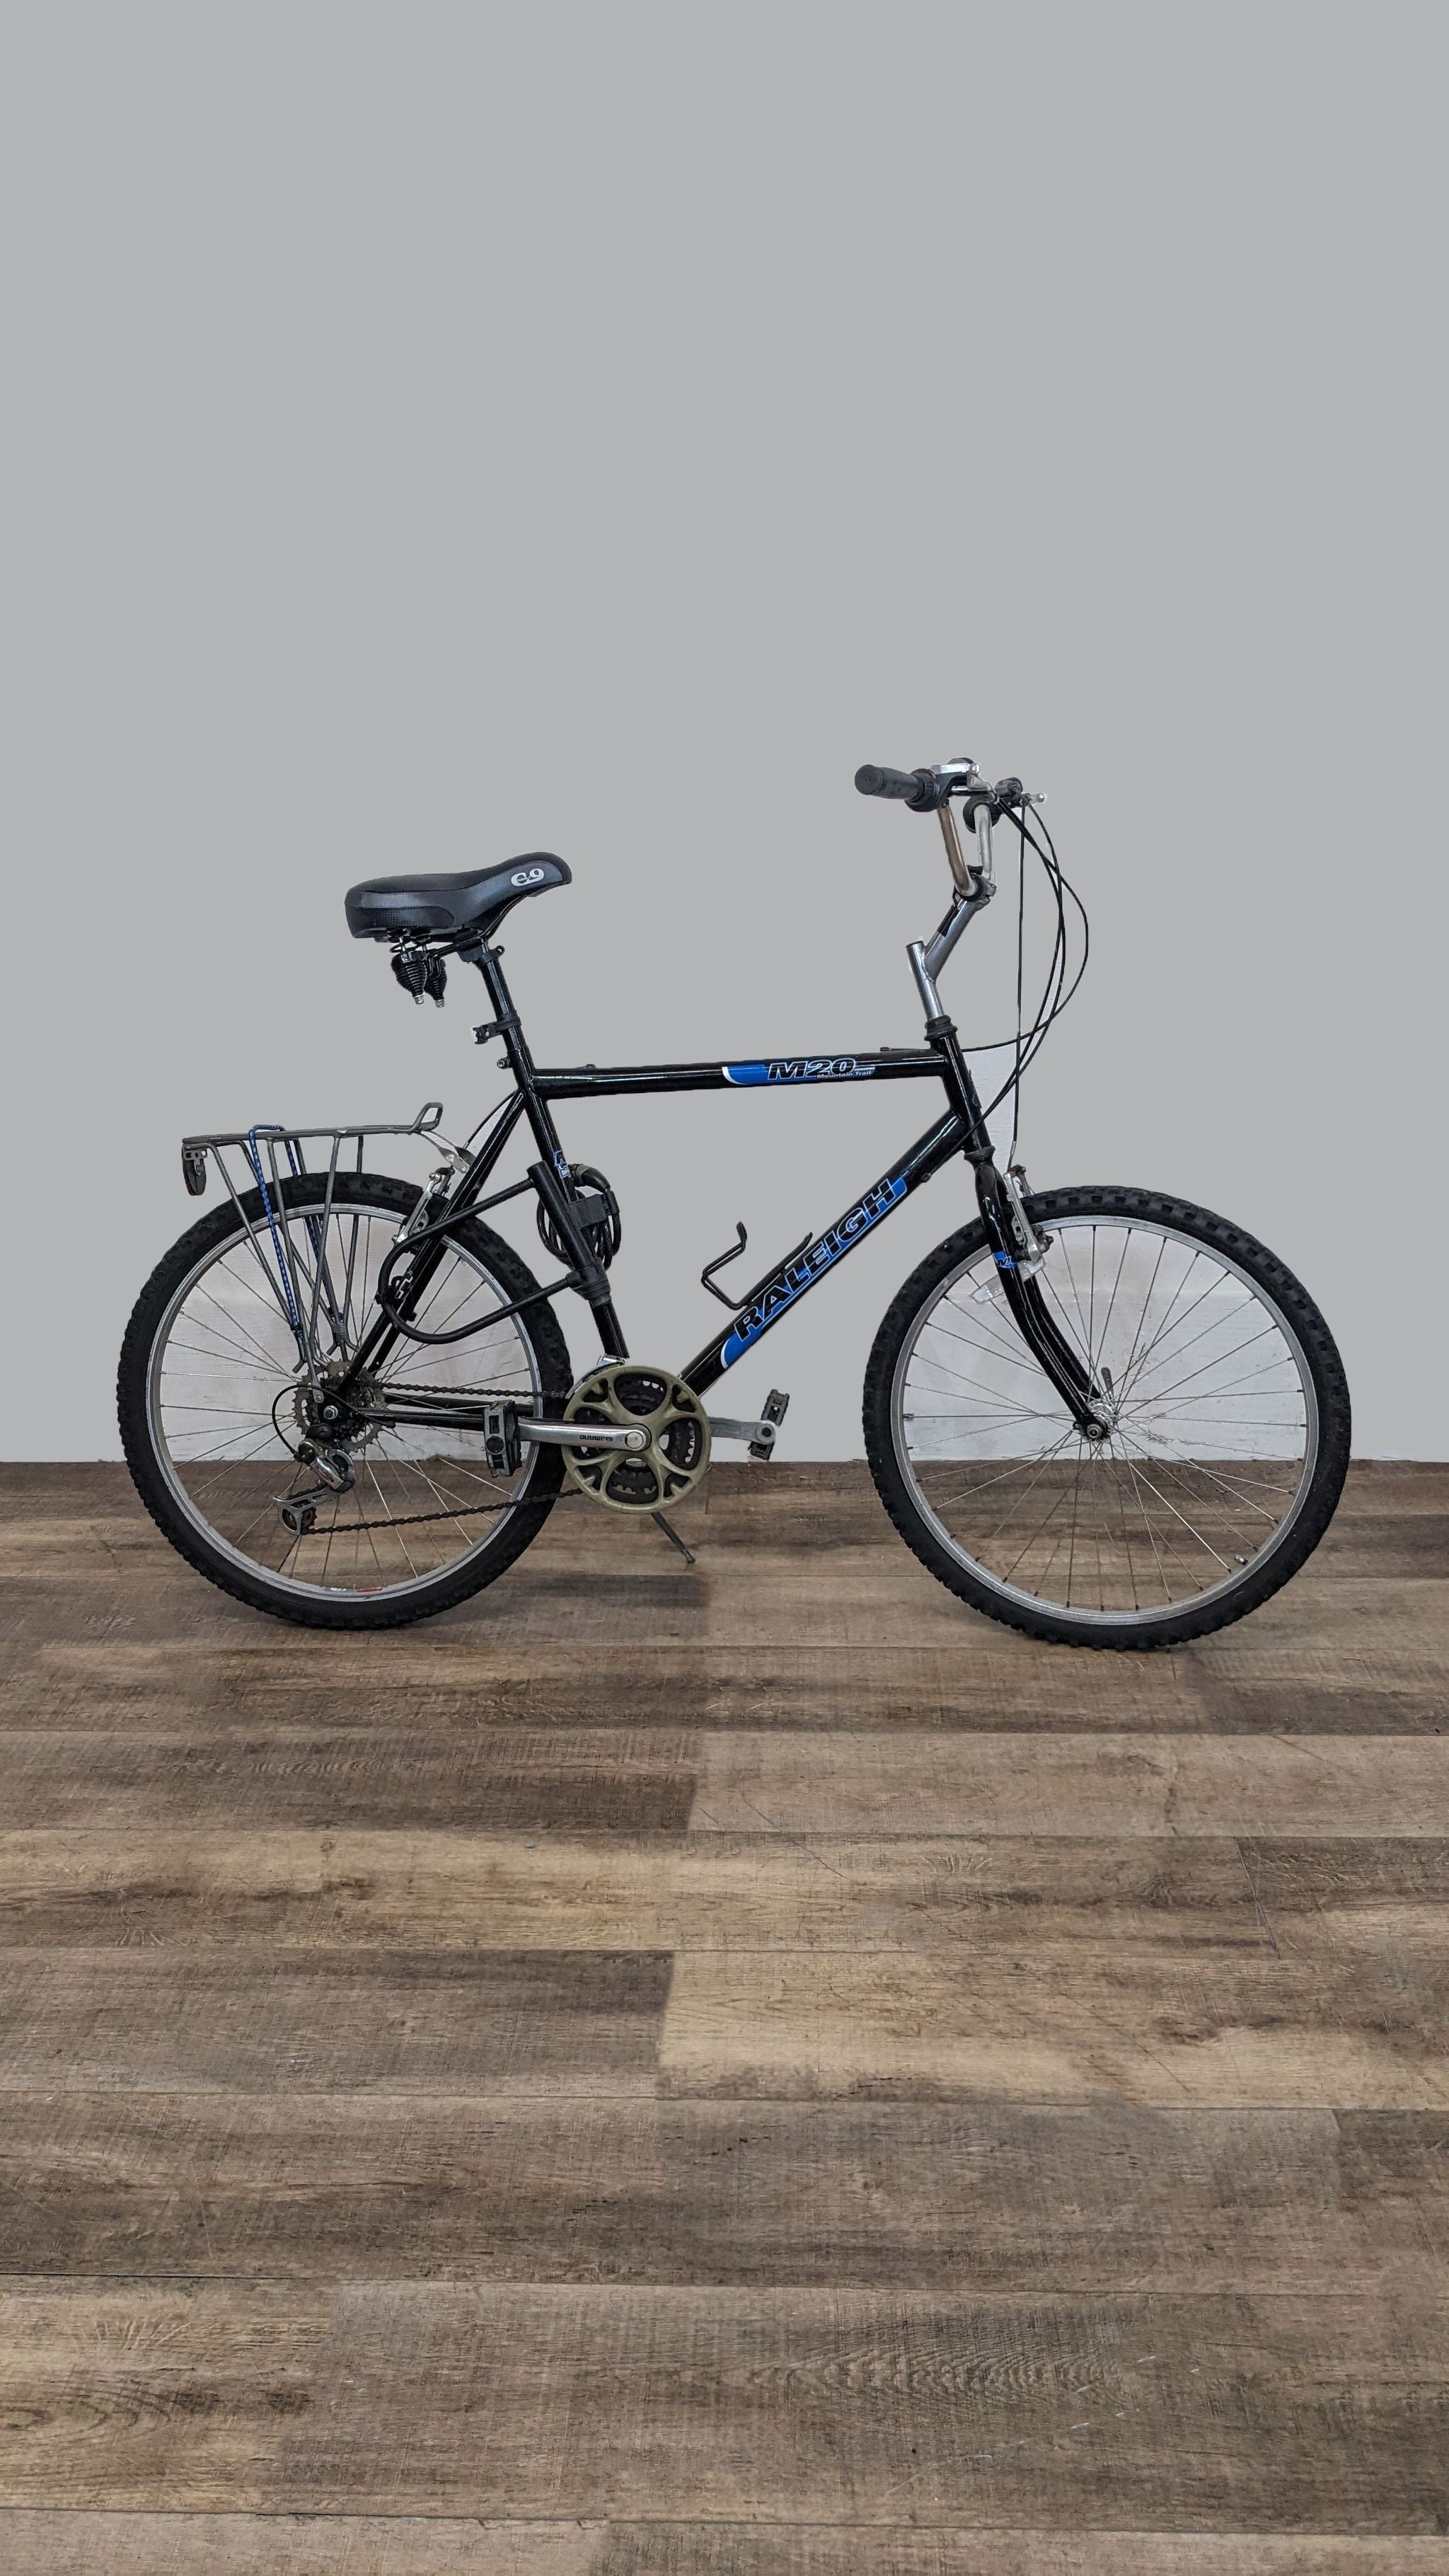 Raleigh mountain bike with black frame and blue decals on wooden floor.